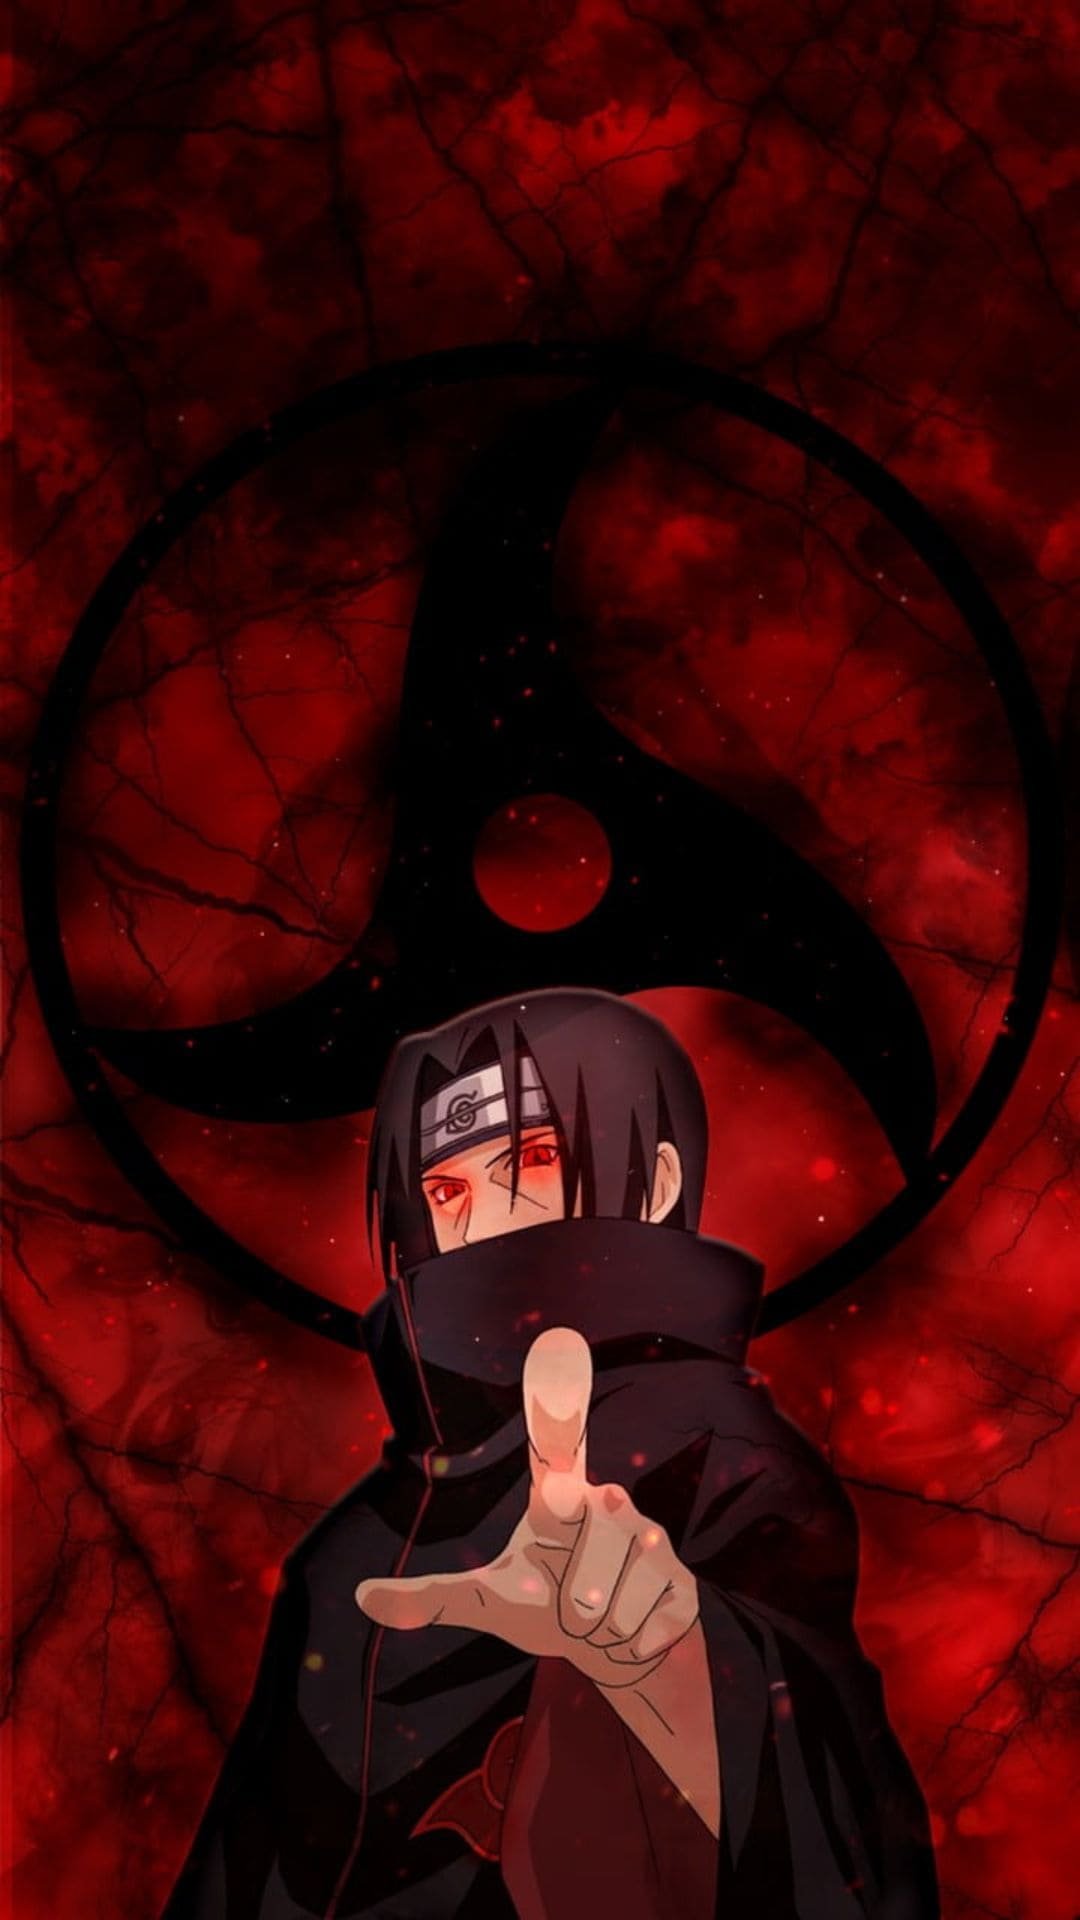 4K Moon iTachi Wallpaper for iPhone Backgrounds from Naruto anime 2